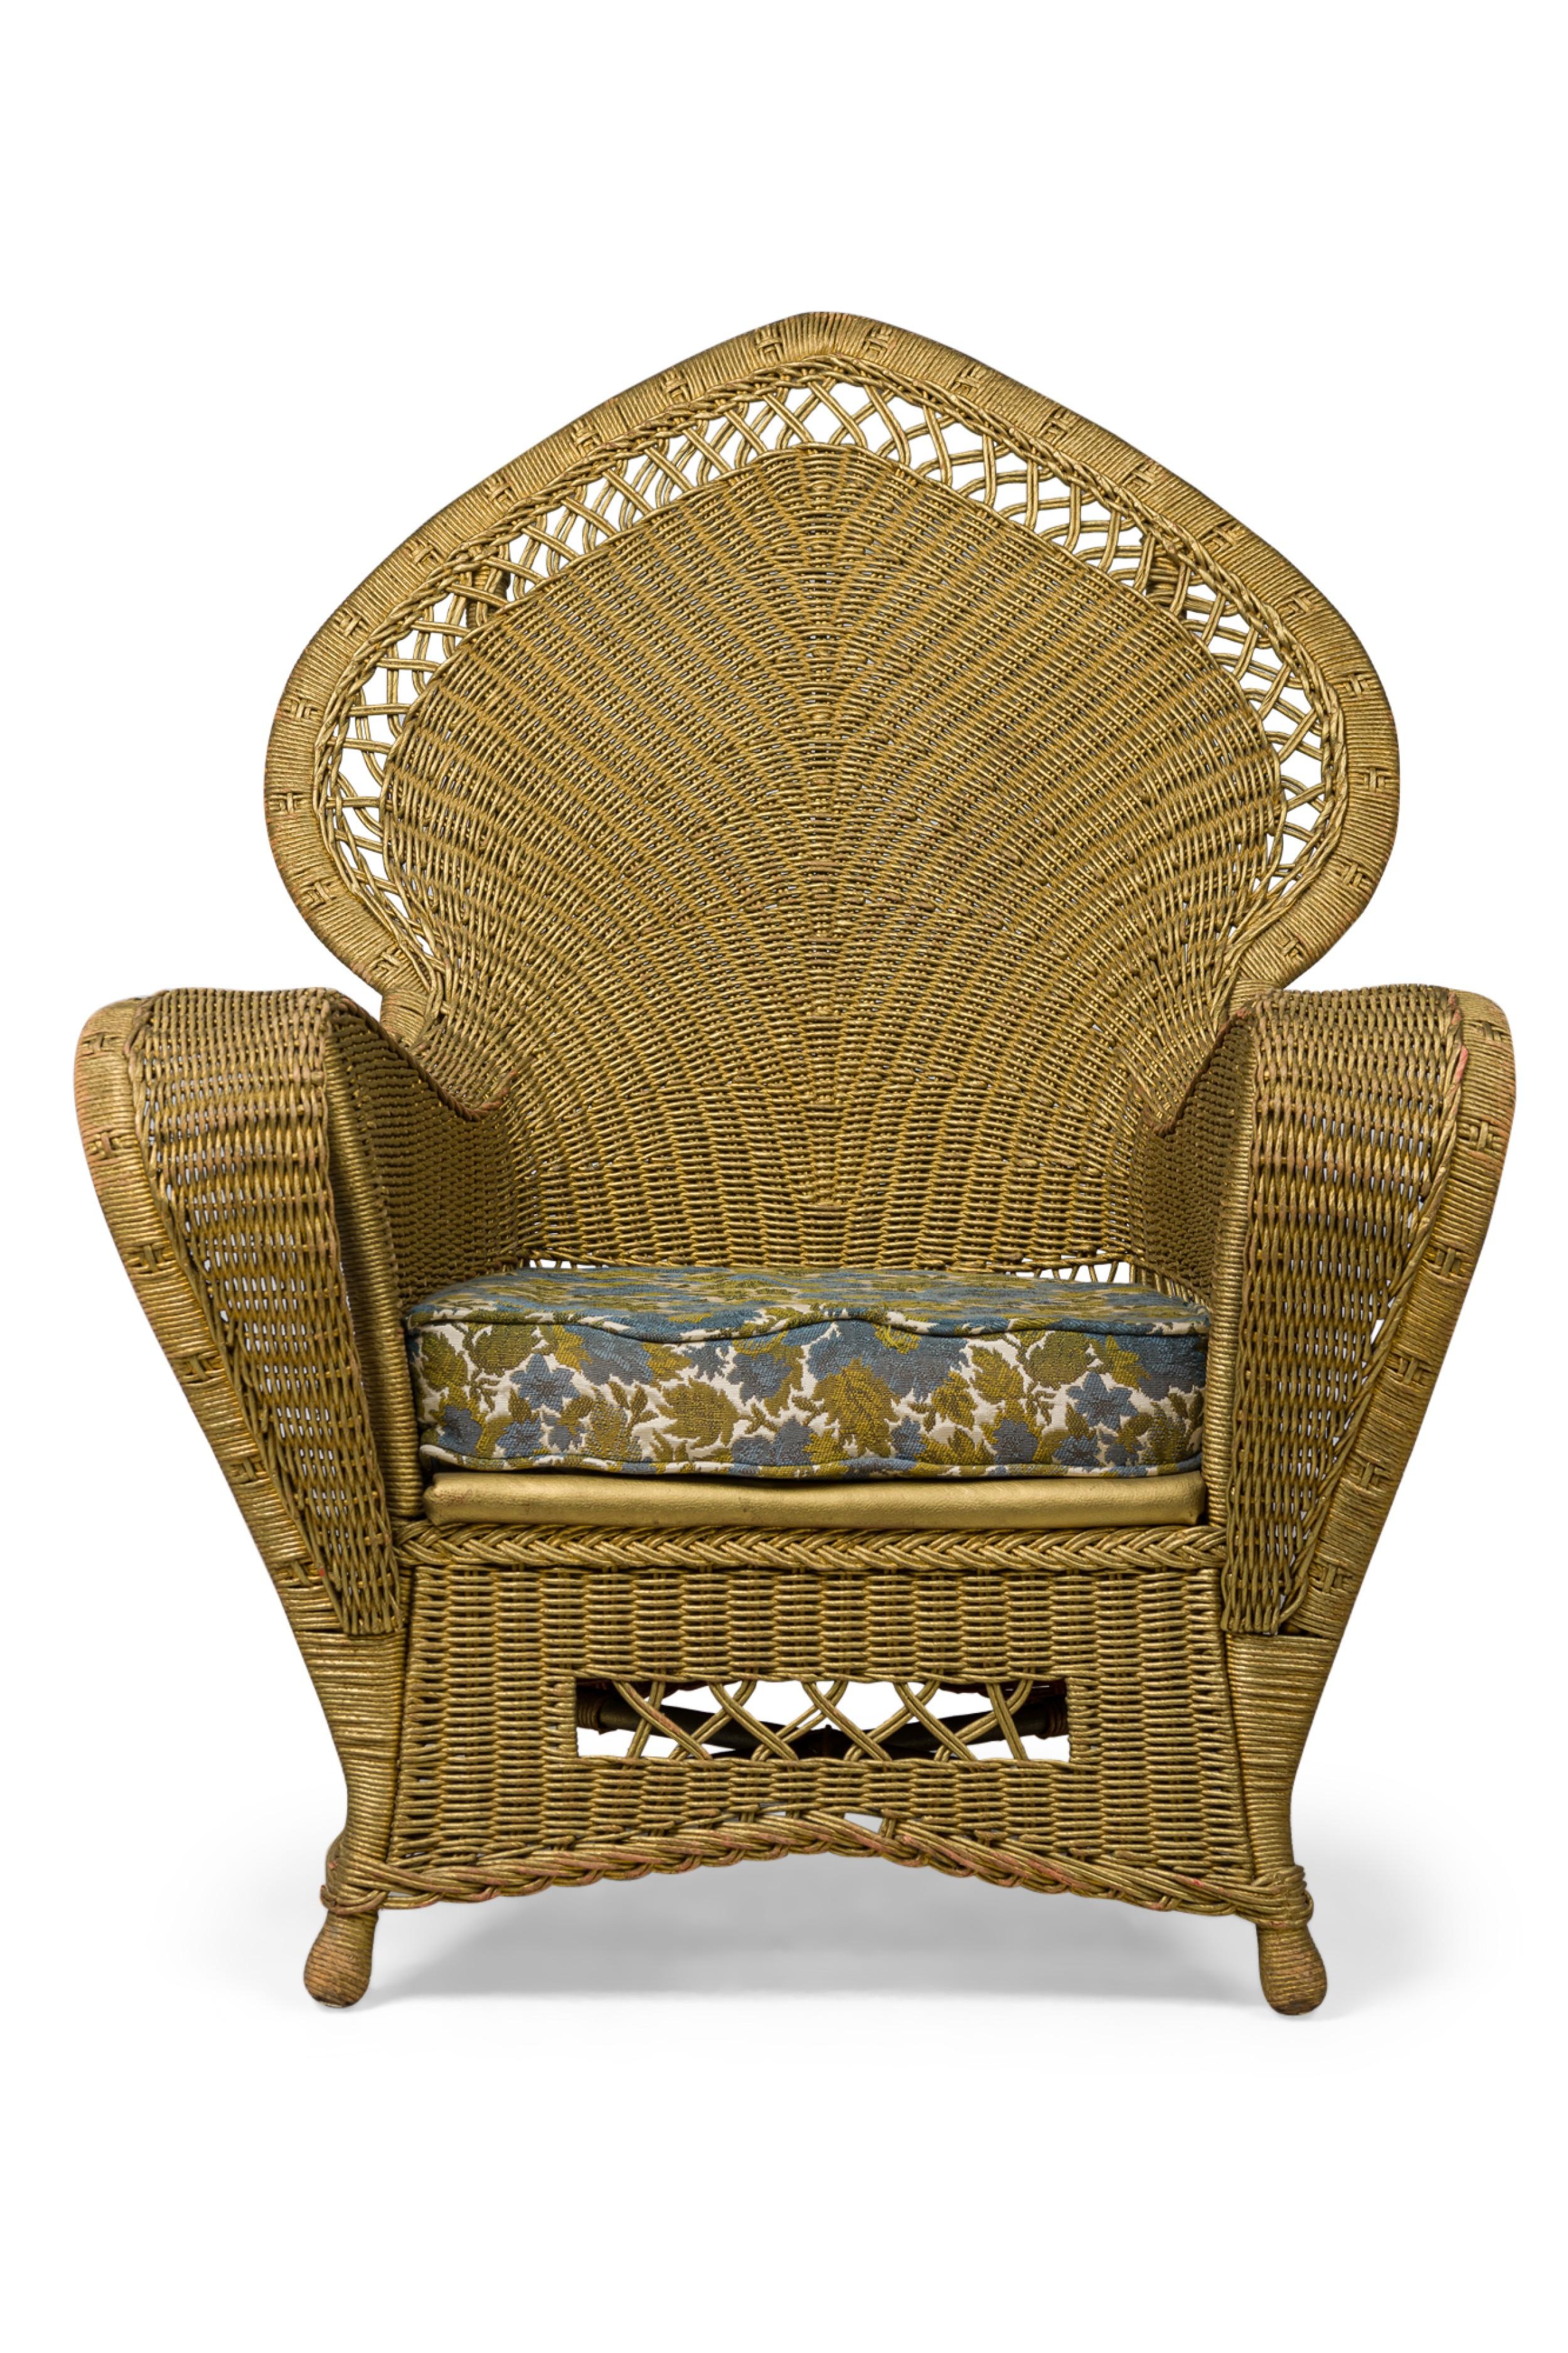 PAIR of similar paper cord Art Deco wicker armchairs, one with a rounded back and one with a pointed back, both painted gold with removable seat cushions upholstered in a green, blue, and beige floral tapestry fabric. (PRICED AS PAIR)
 

 Rounded